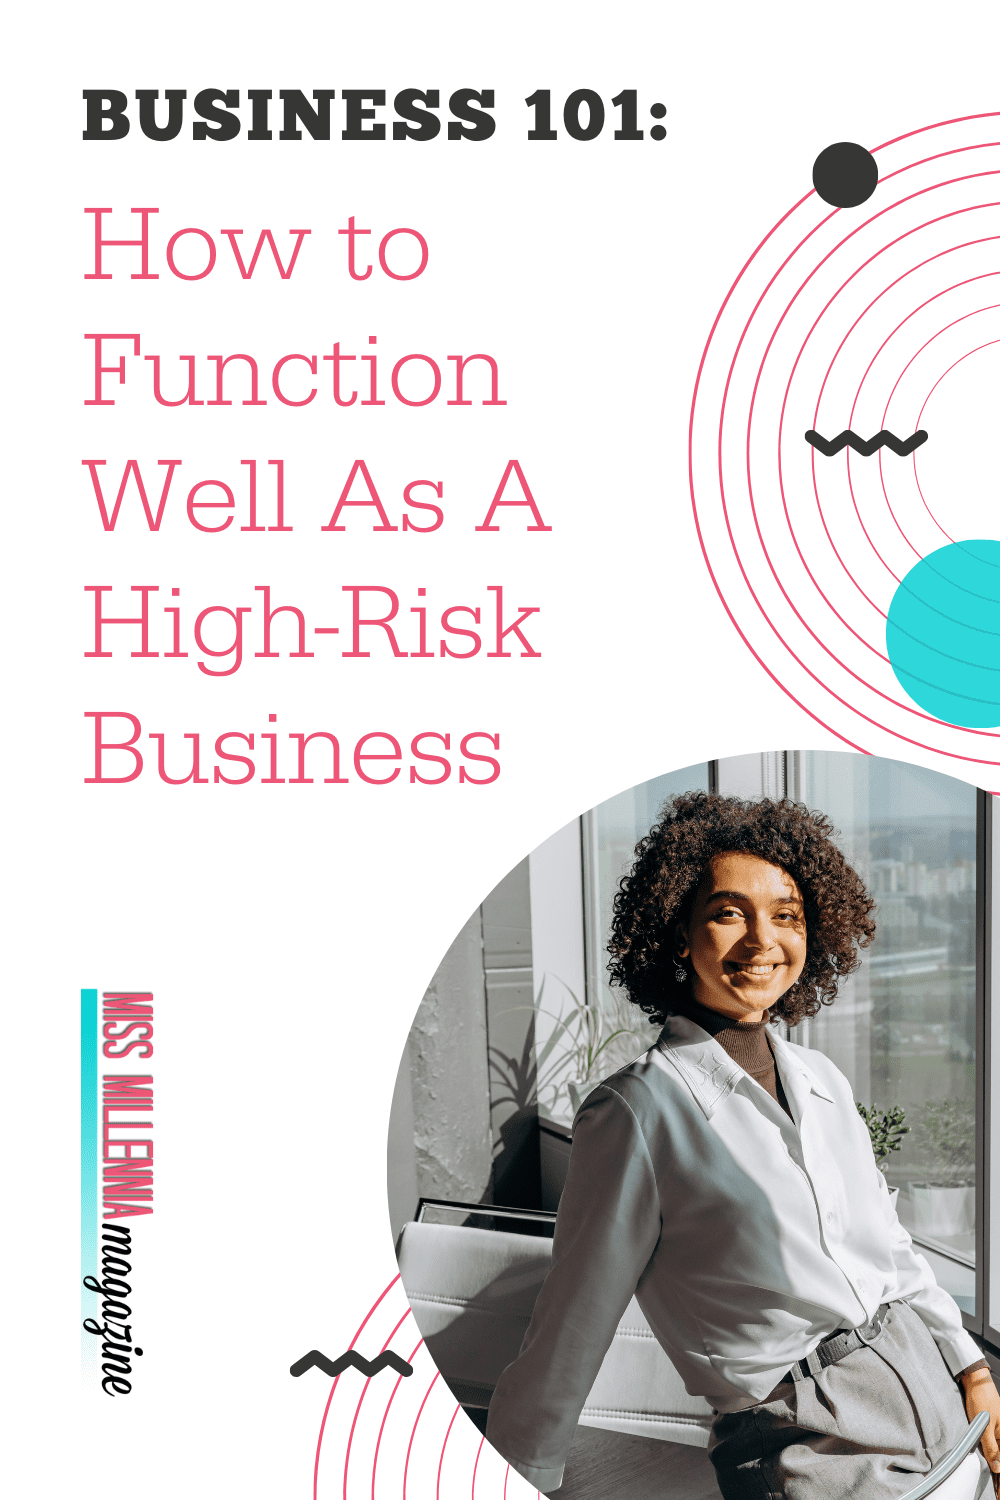 Business 101: How to Function Well As A High-Risk Business